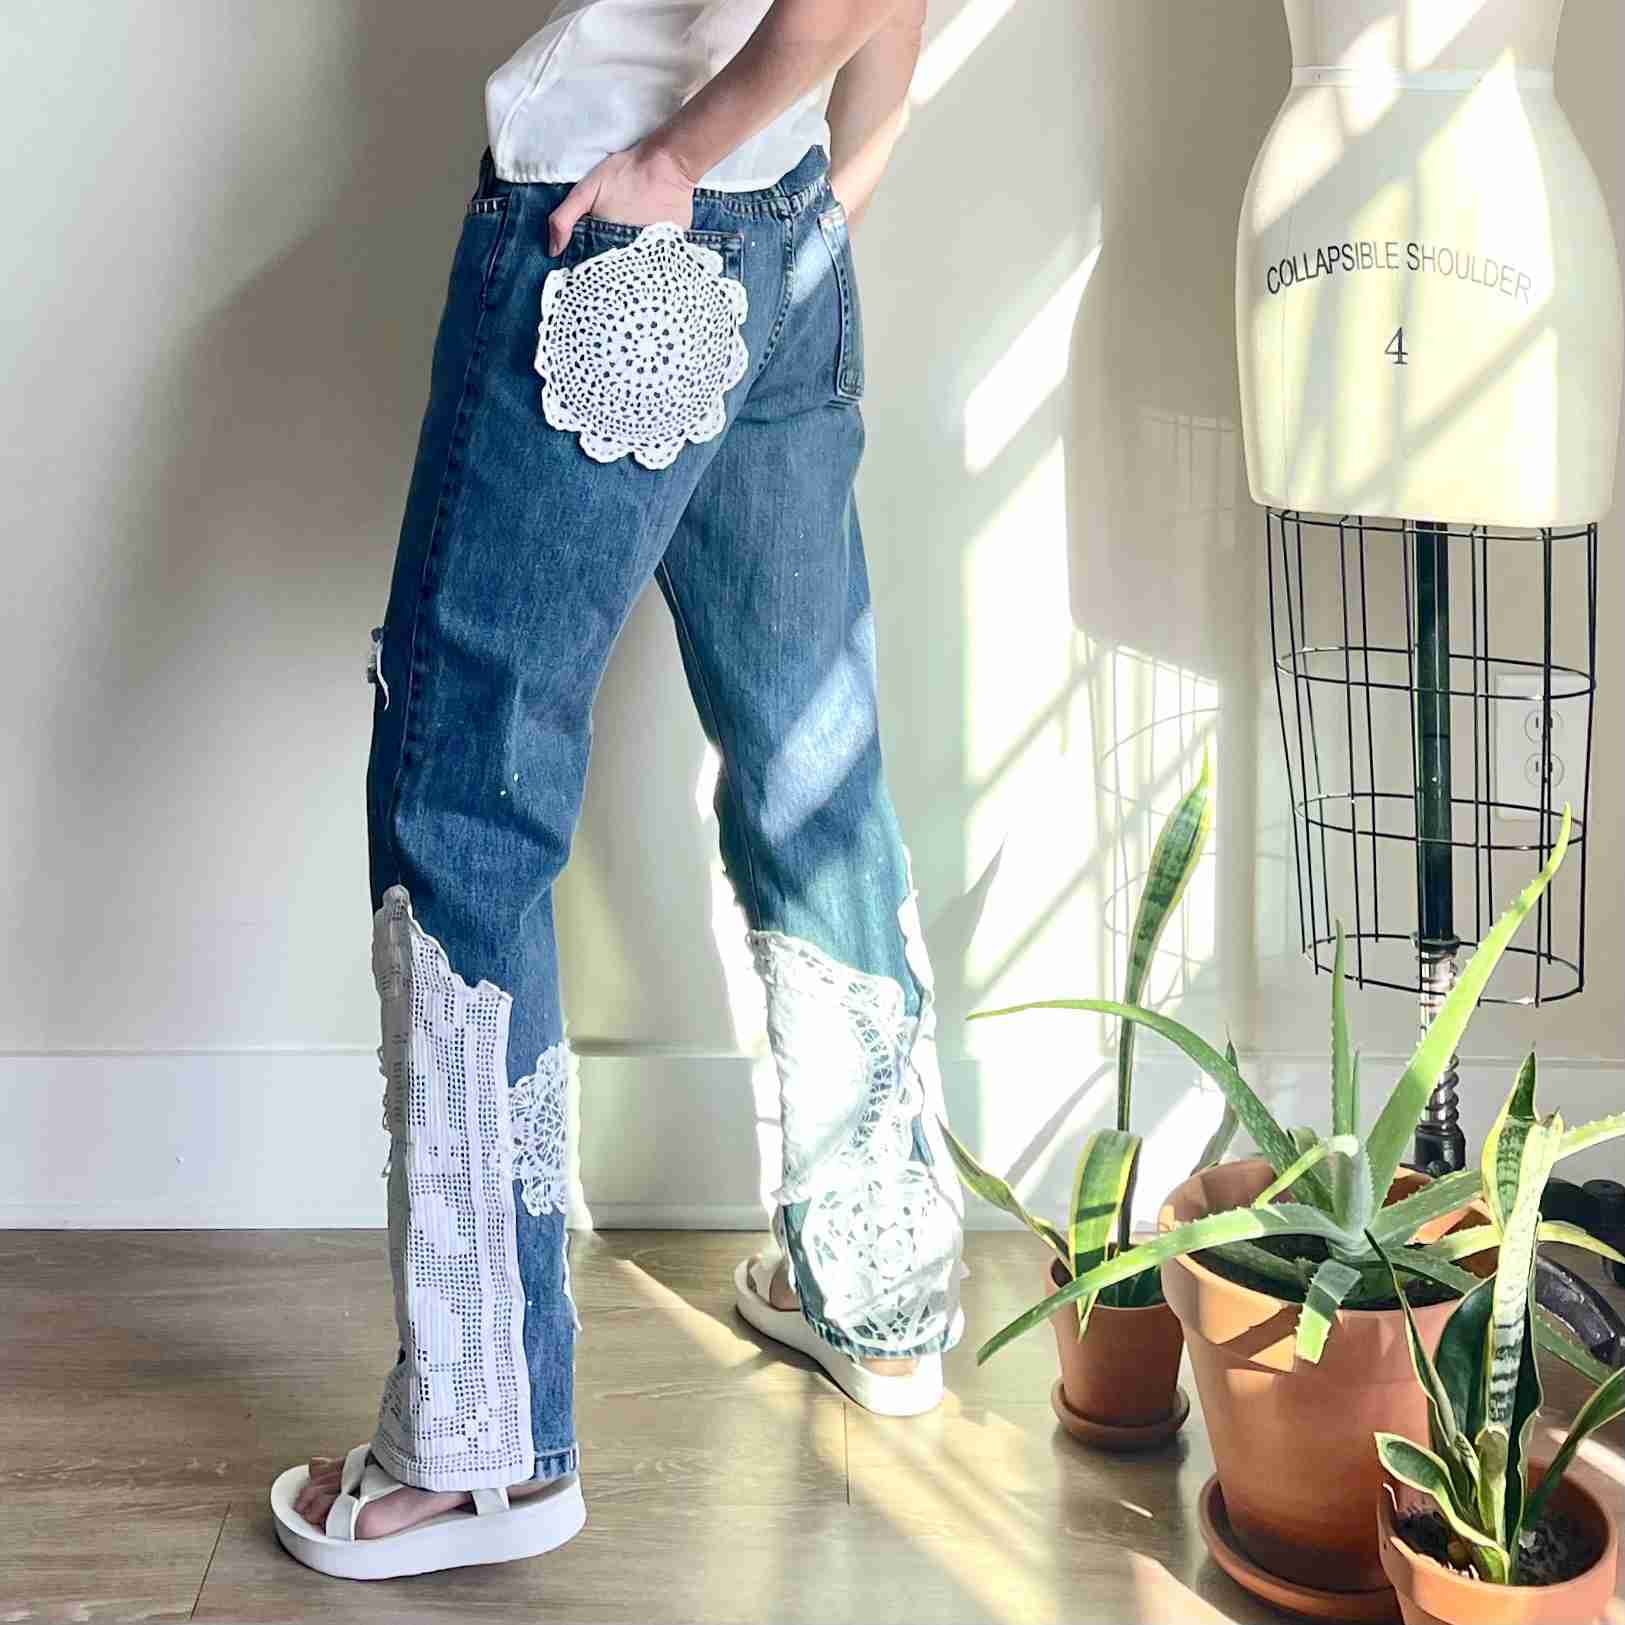 DIY Lace Jean Patch  Diy ripped jeans, Patched jeans diy, Diy